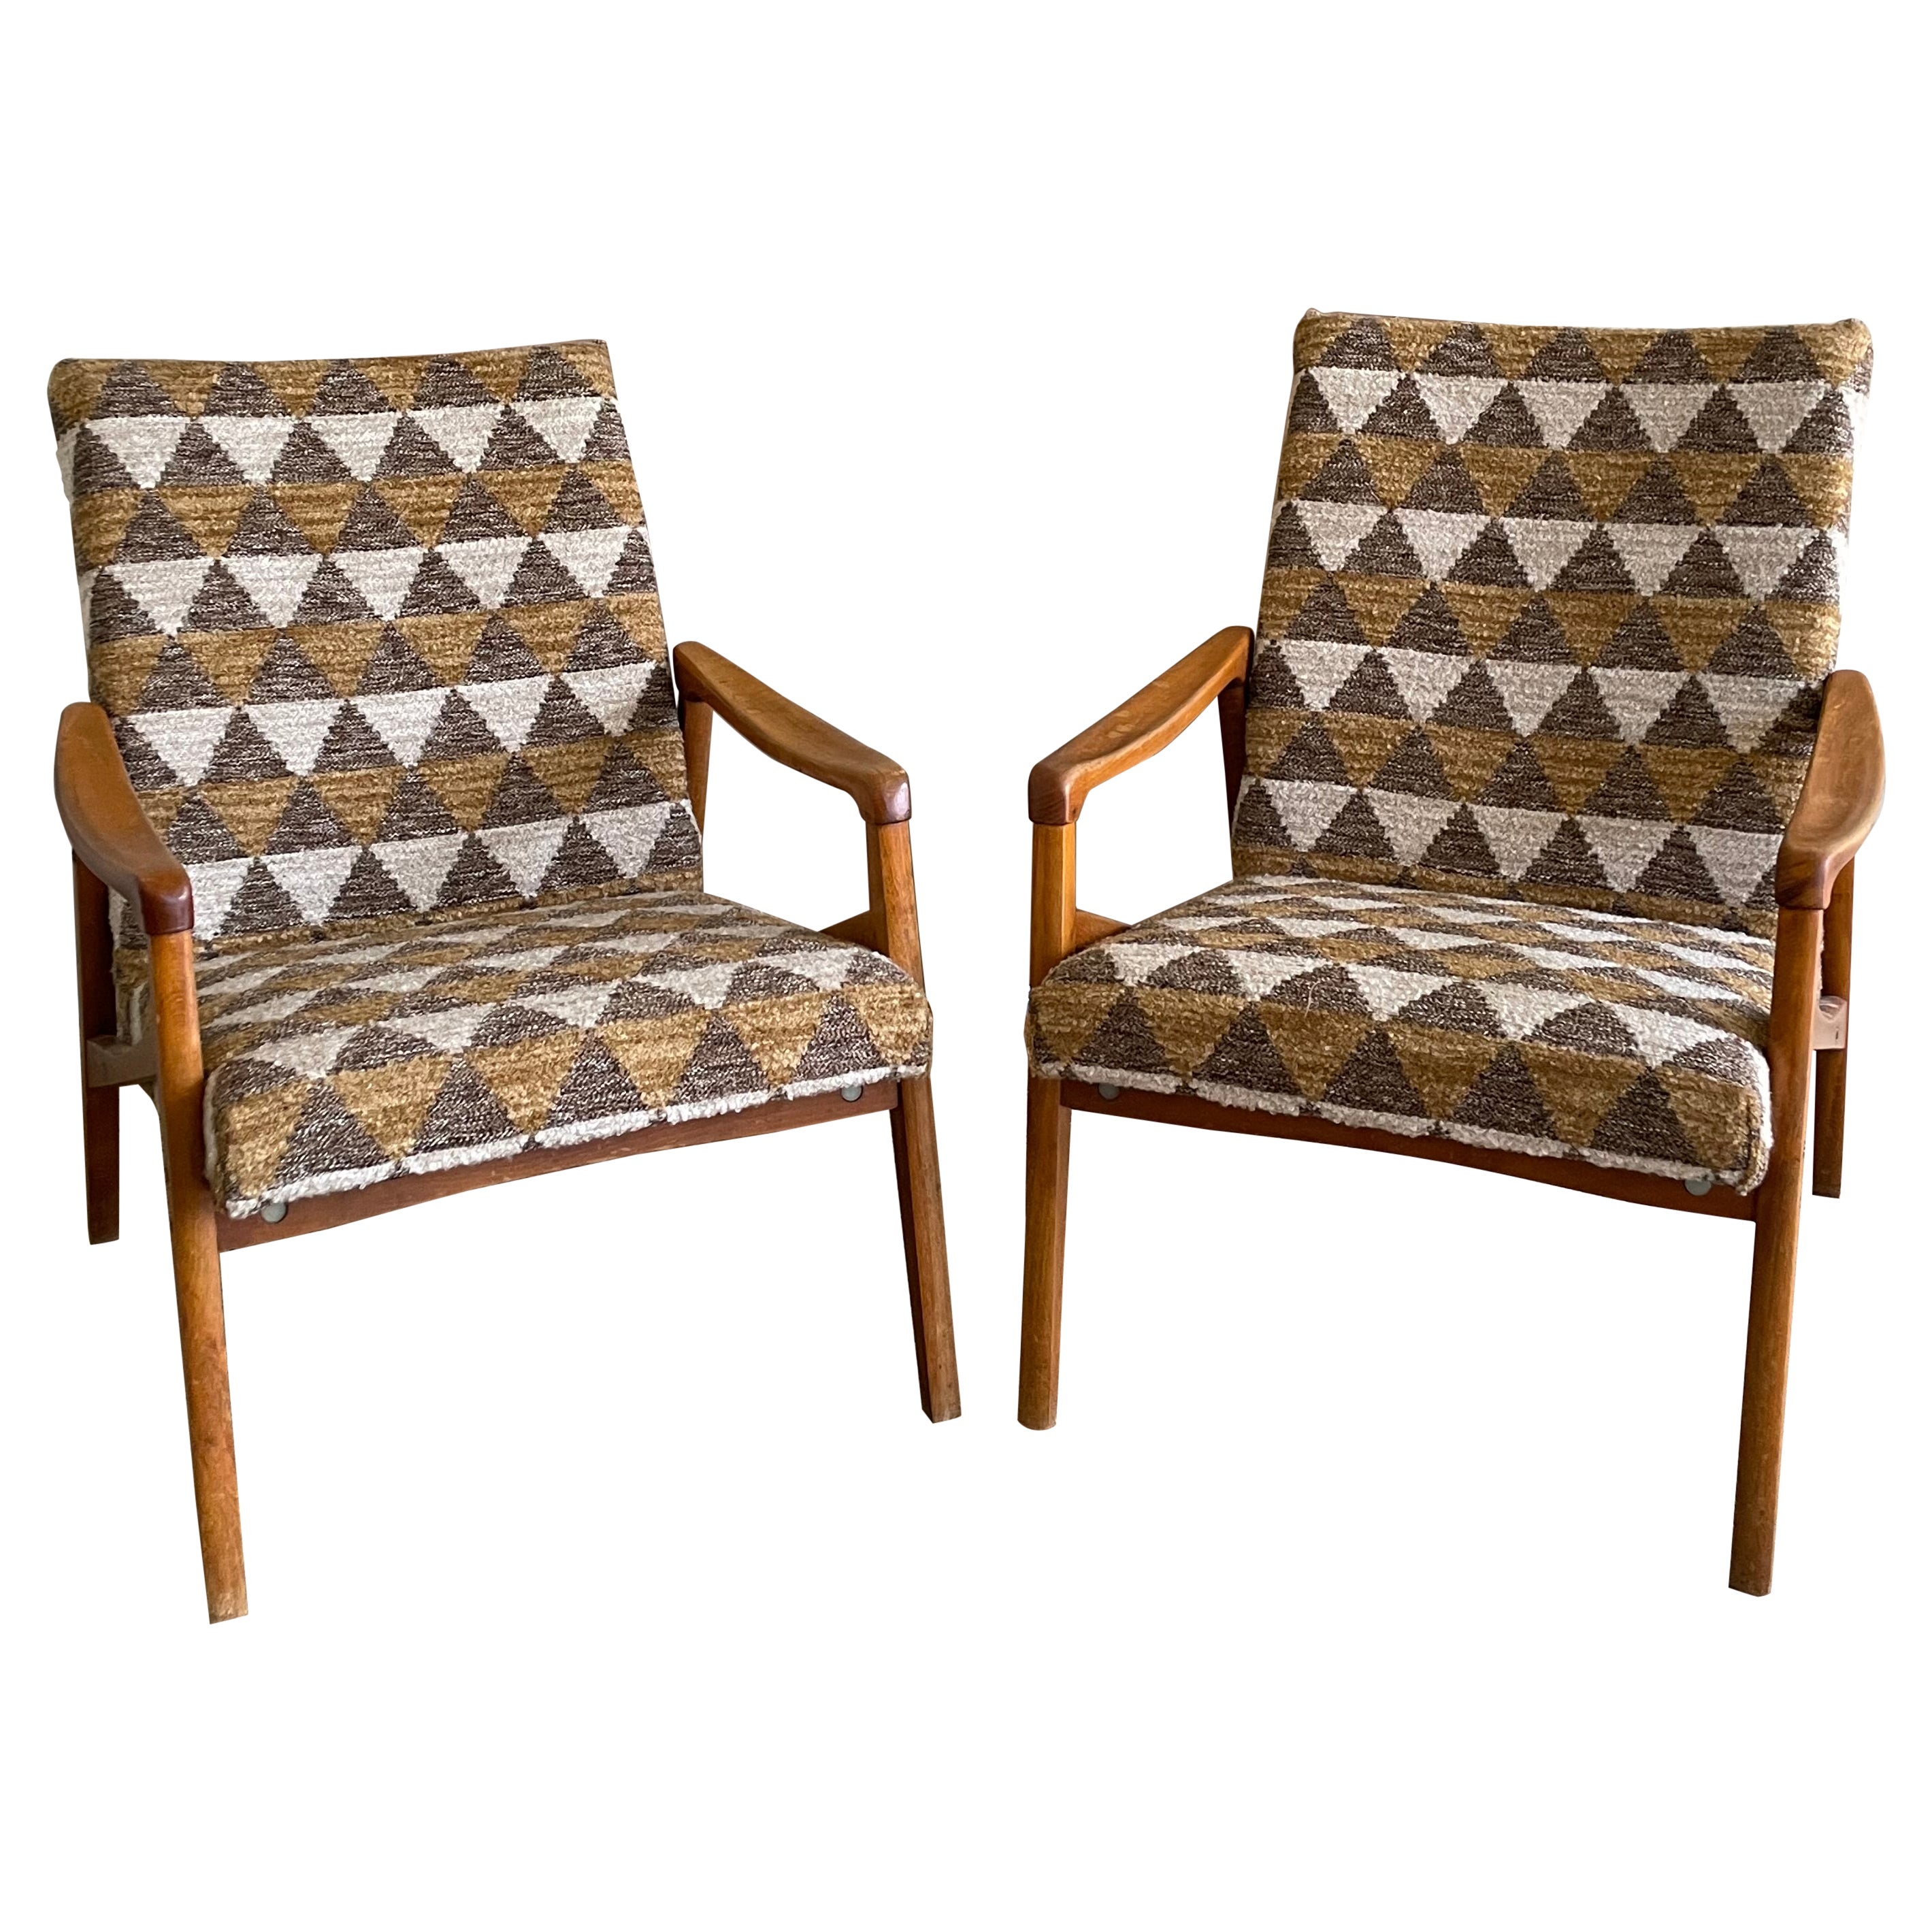 Pair Newly Upholstered Midcentury Teak Armchairs Olive & Beige Geometric Pattern For Sale